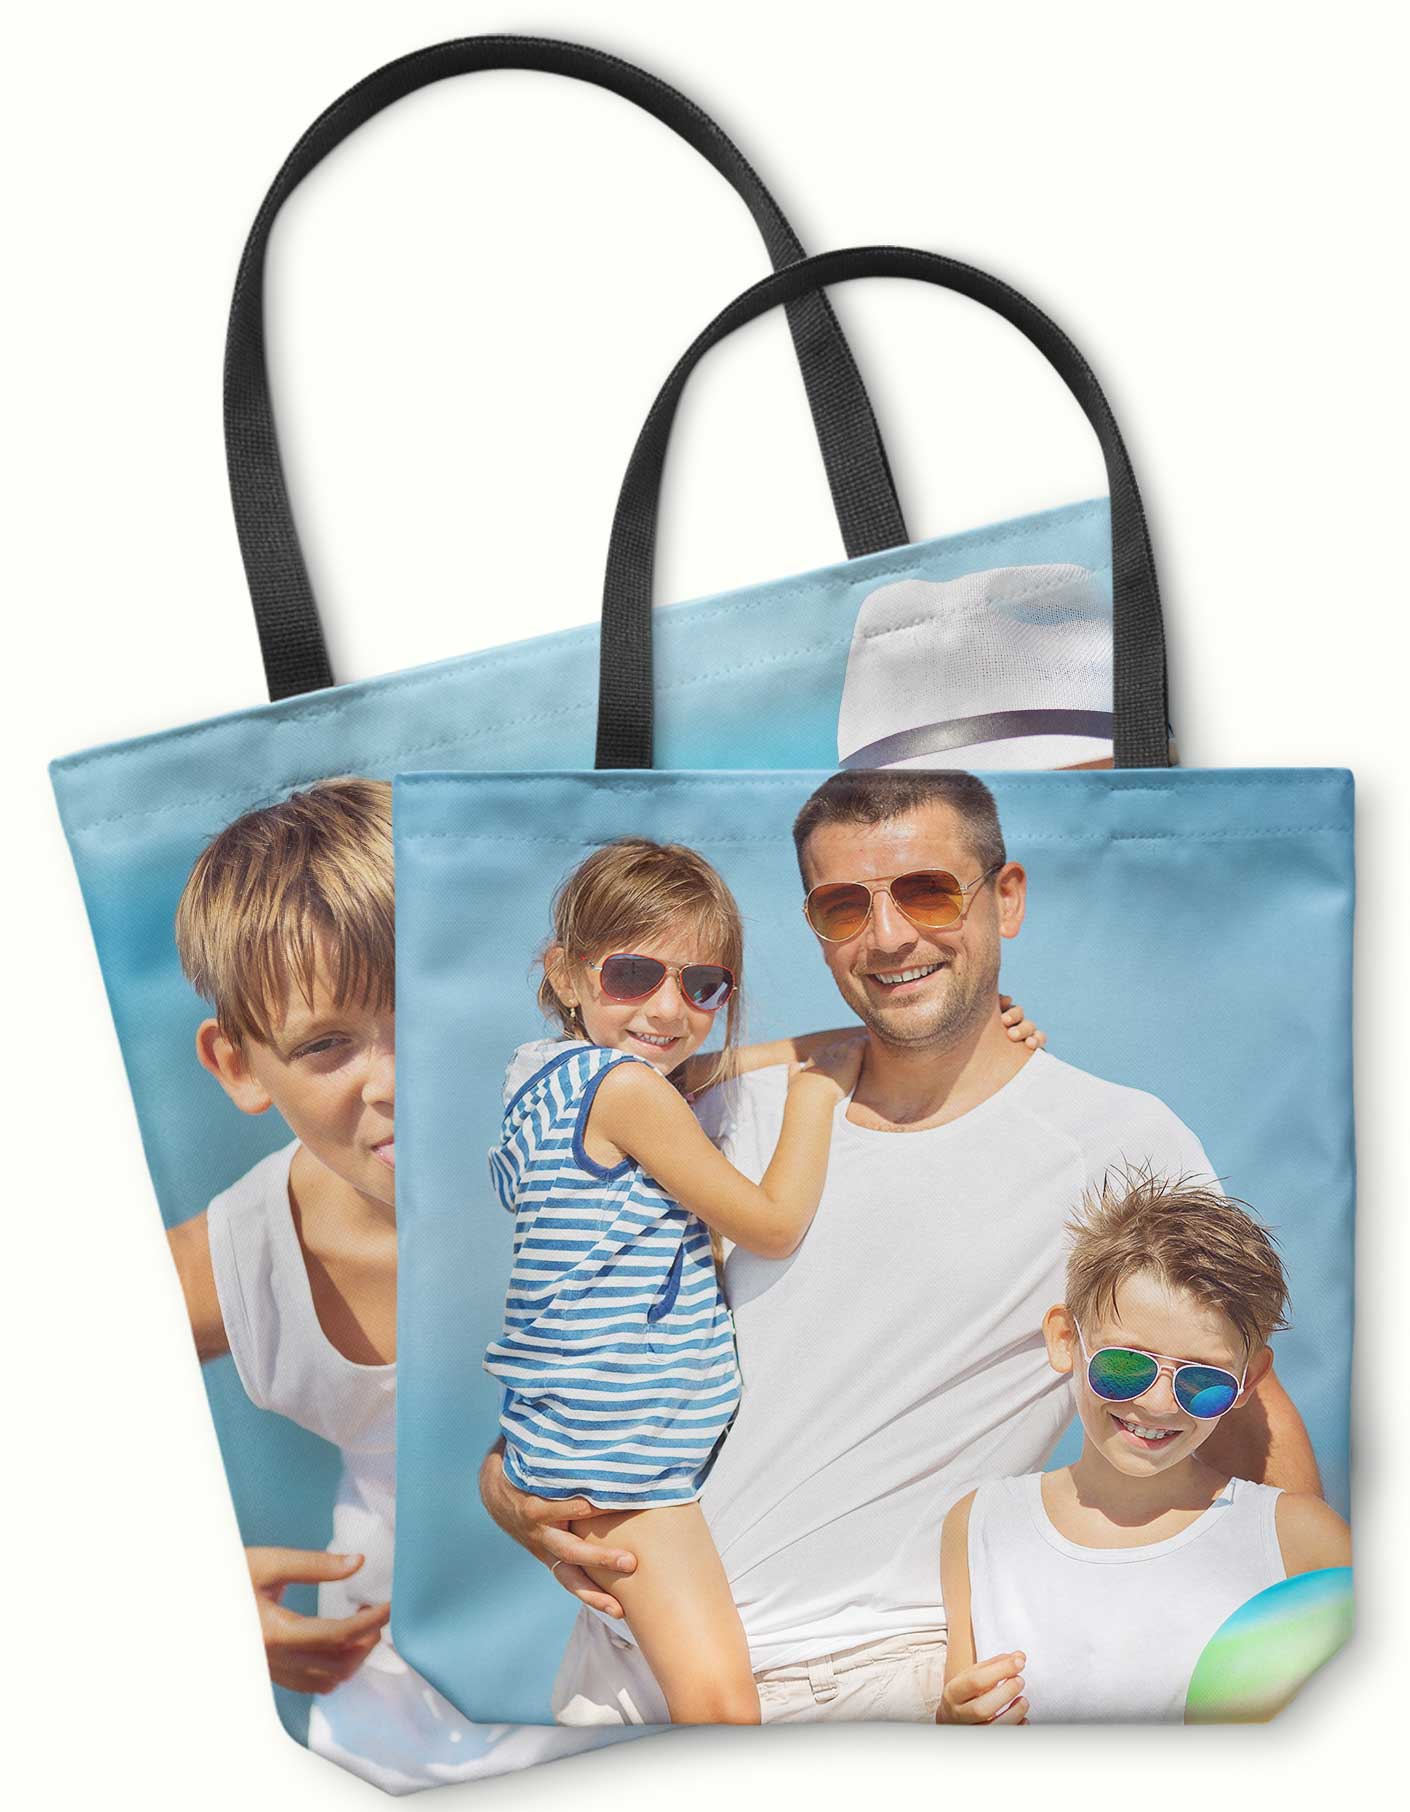 Custom Printed Tote Bag  It's Easy To Design Yours Today!